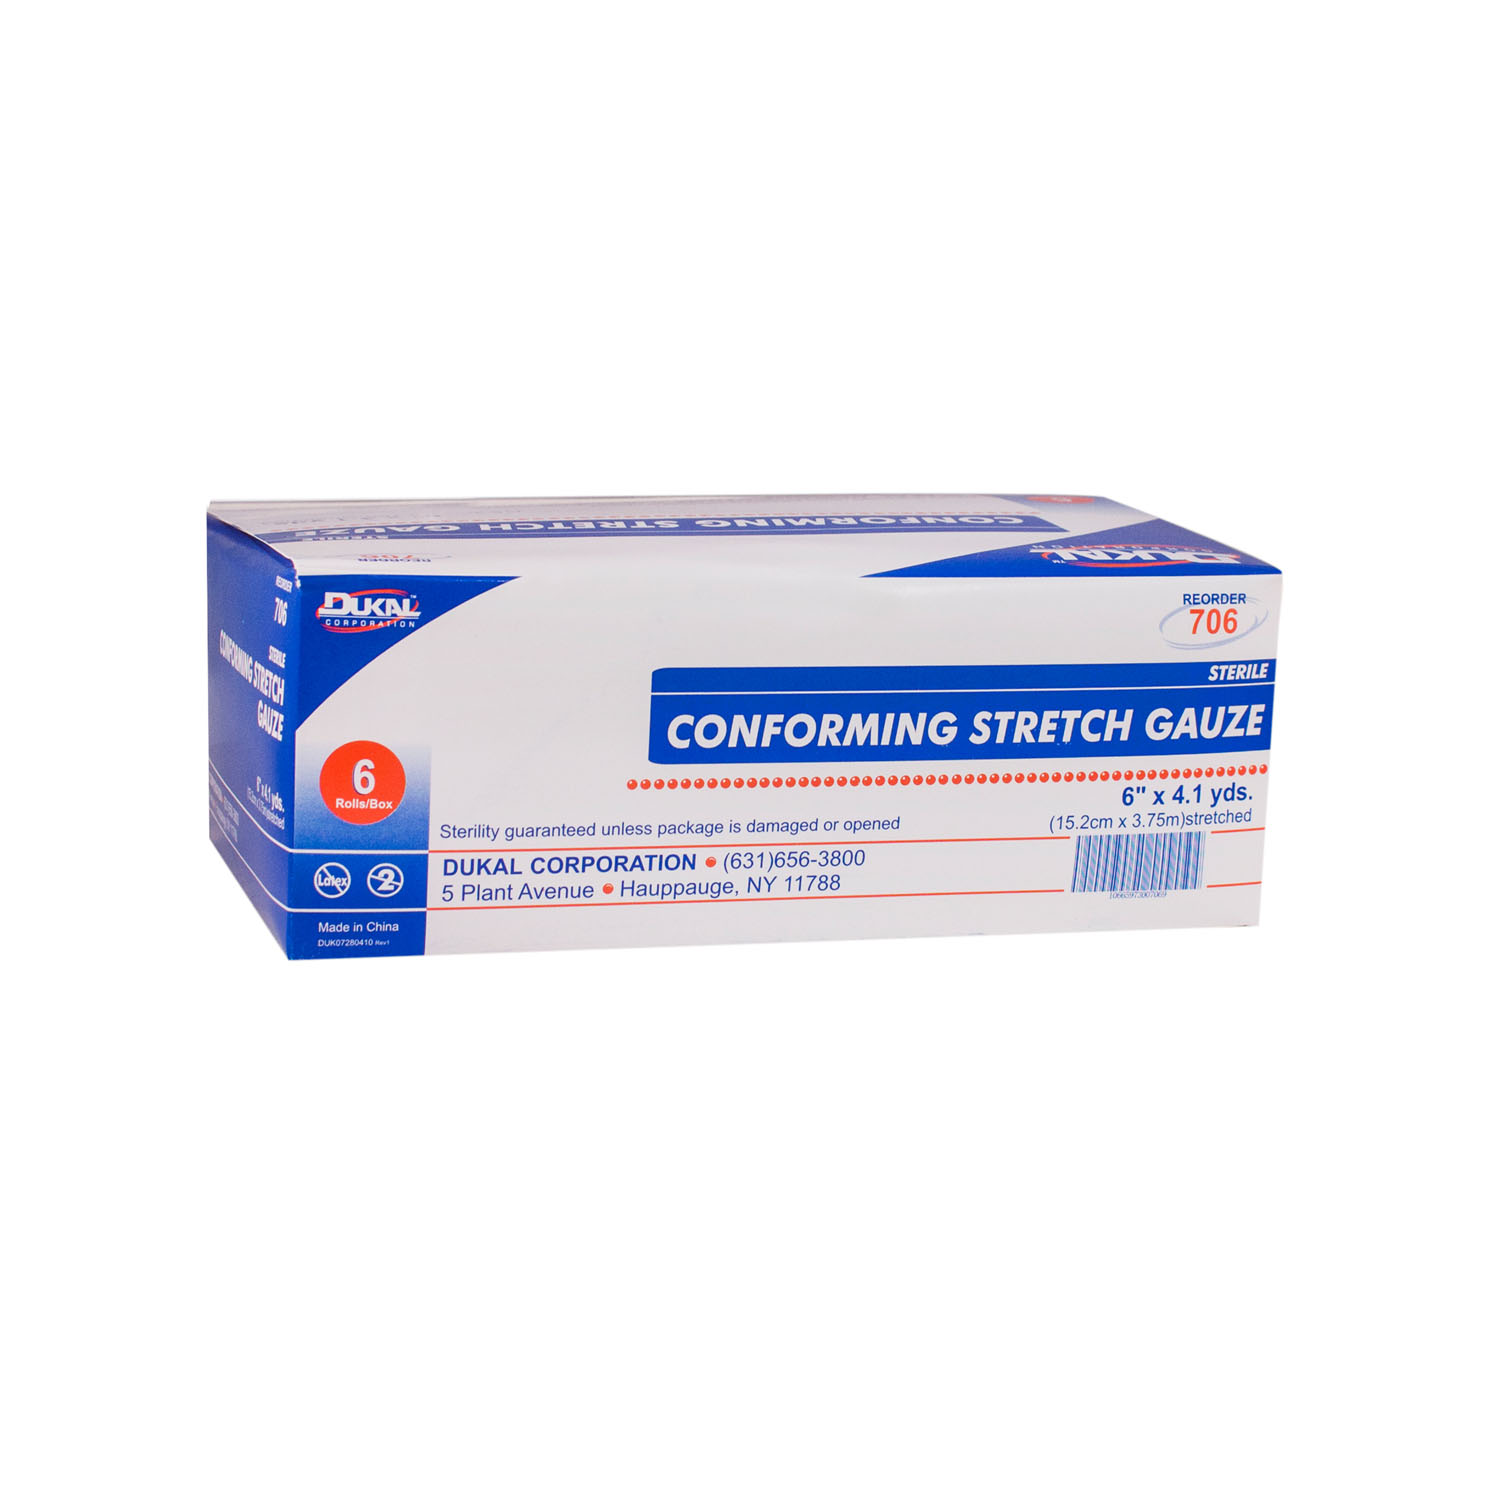 DUKAL CONFORMING STRETCH GAUZE : 706 BX $7.25 Stocked